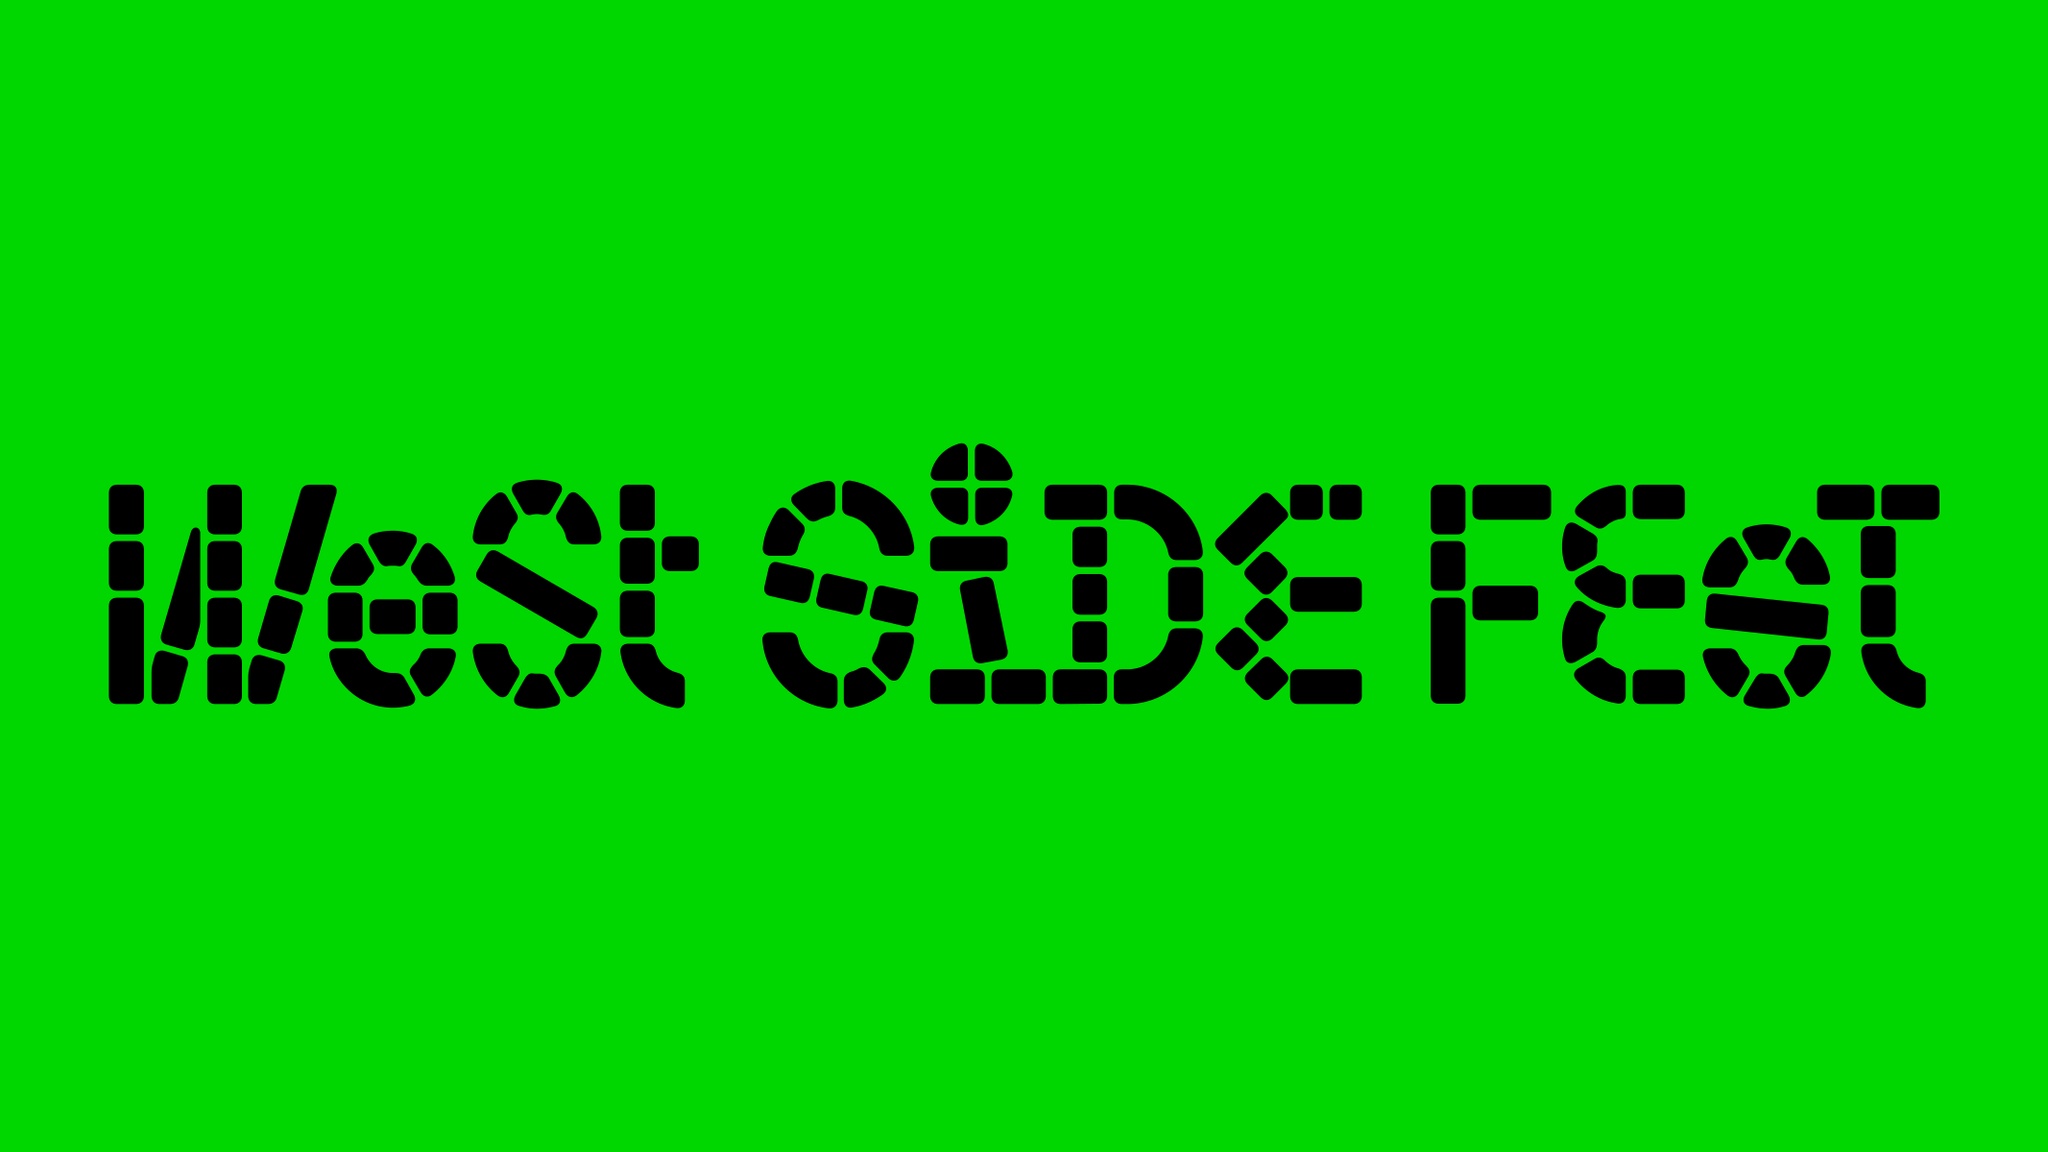 The event title West Side Fest on a lime green background. The letters are made of individual squares that resemble cobblestones. 